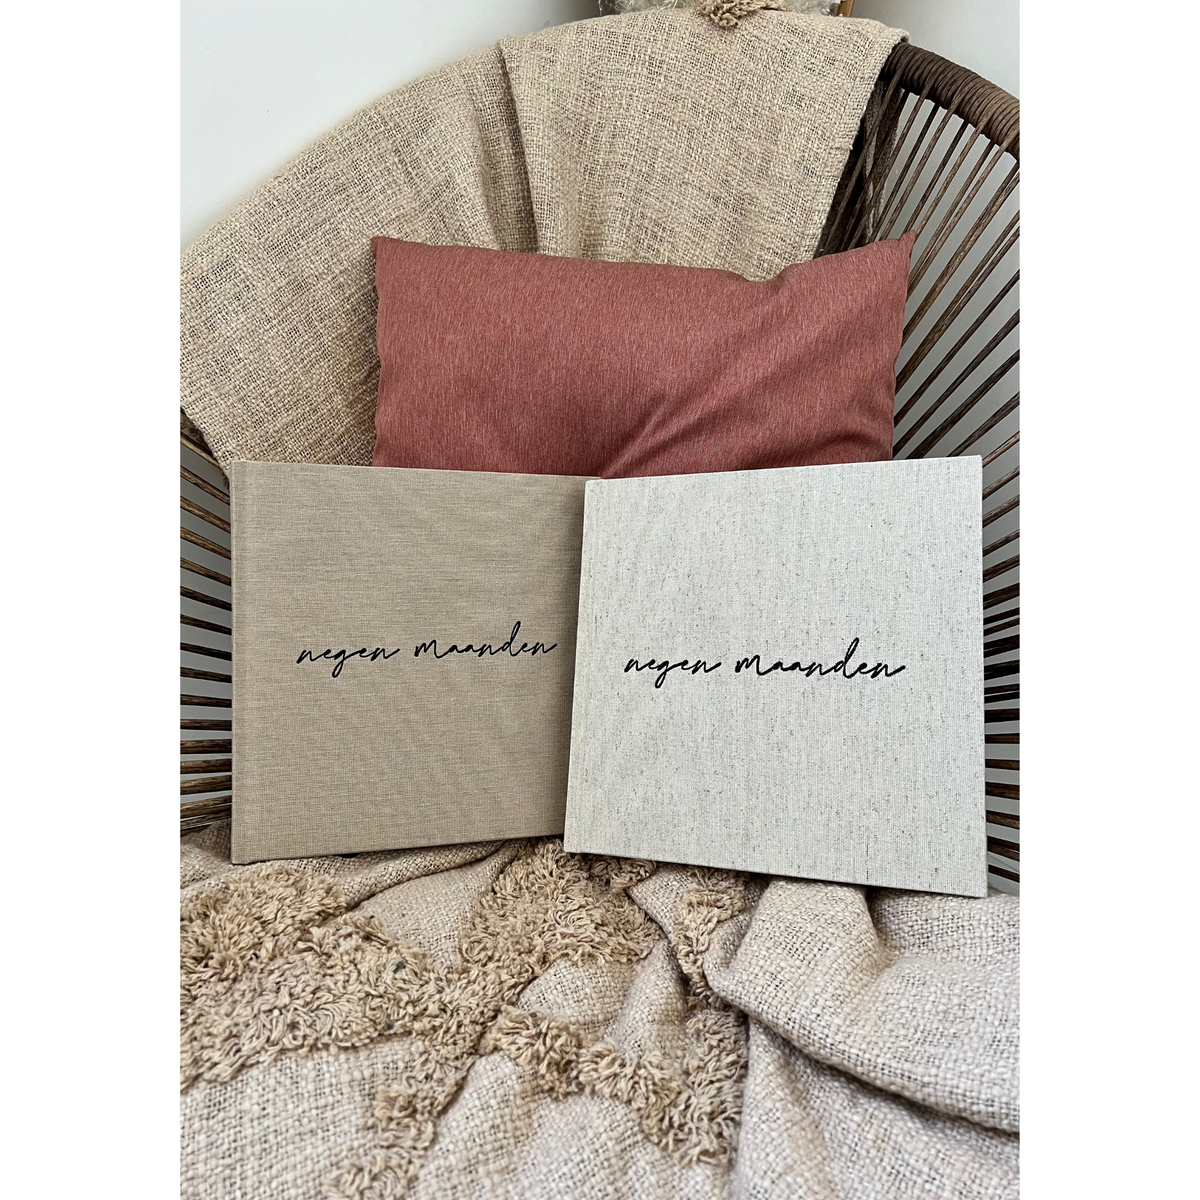 Fill-in book my nine months (natural linen)